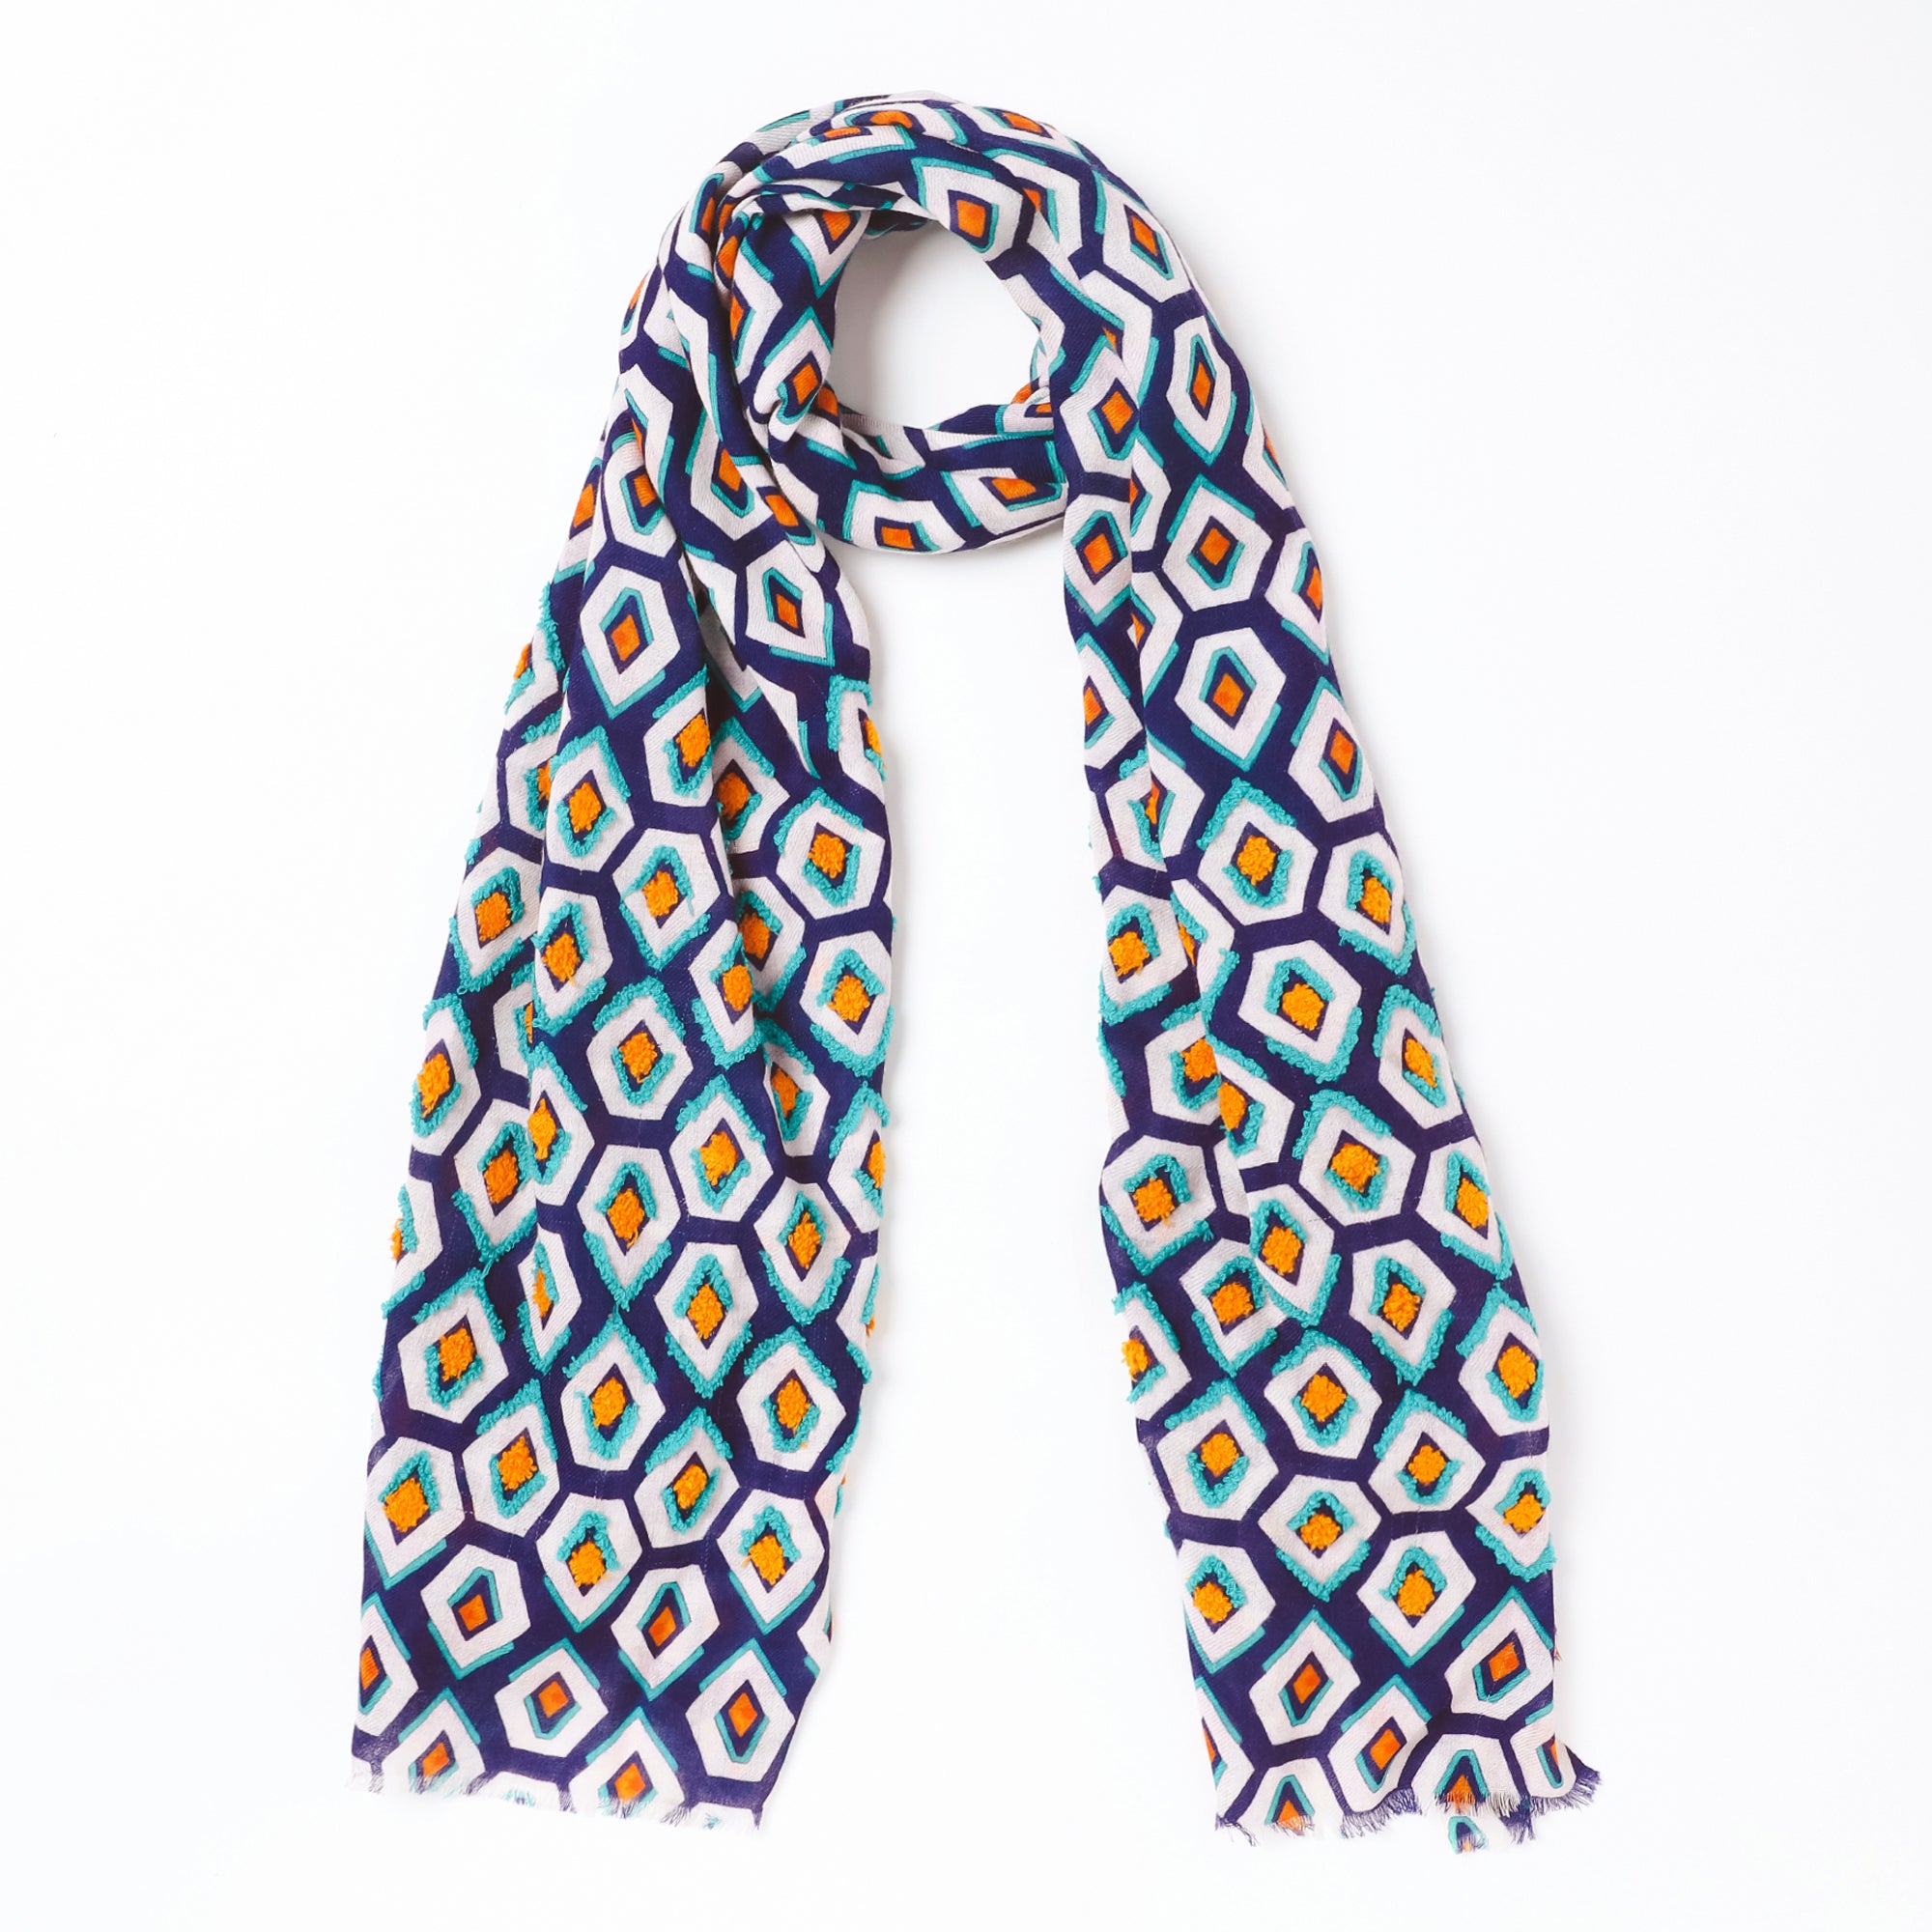 Pentagon Embroidered Scarf - Navy Blue